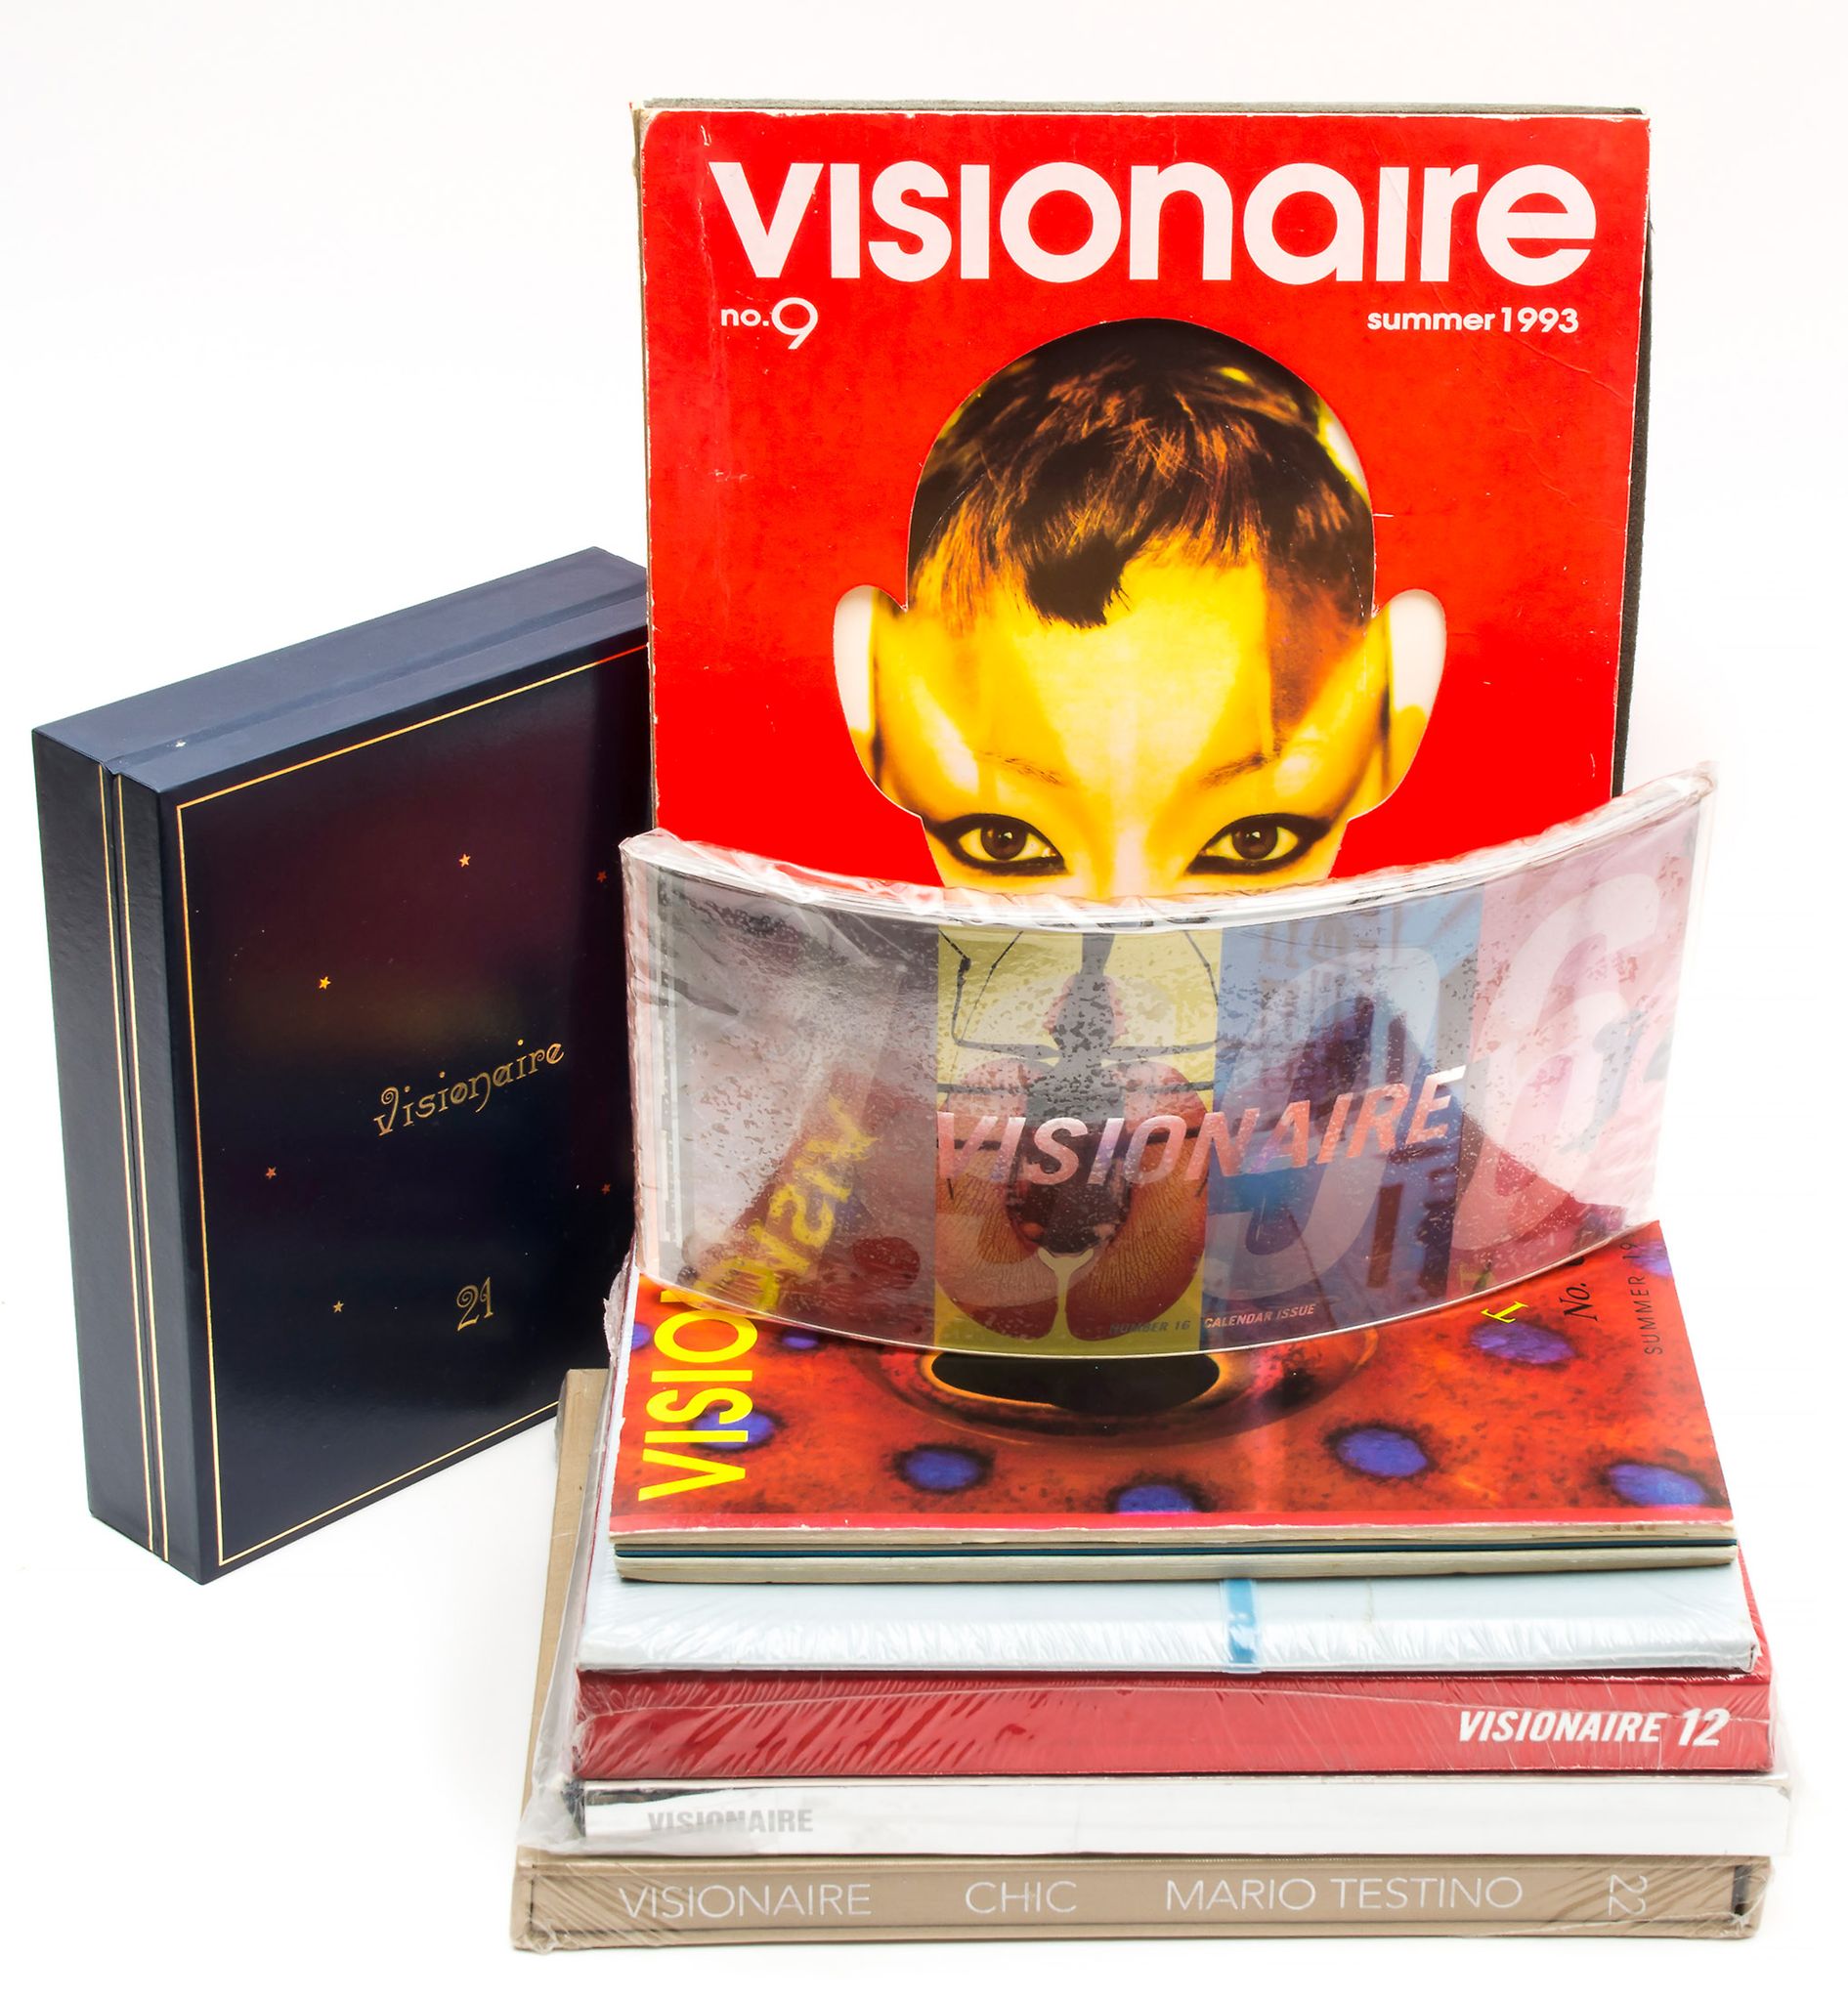 Various artists - A Collection of the Quarterly Magazine Visionaire (1992-1997) Comprising no. 6 -